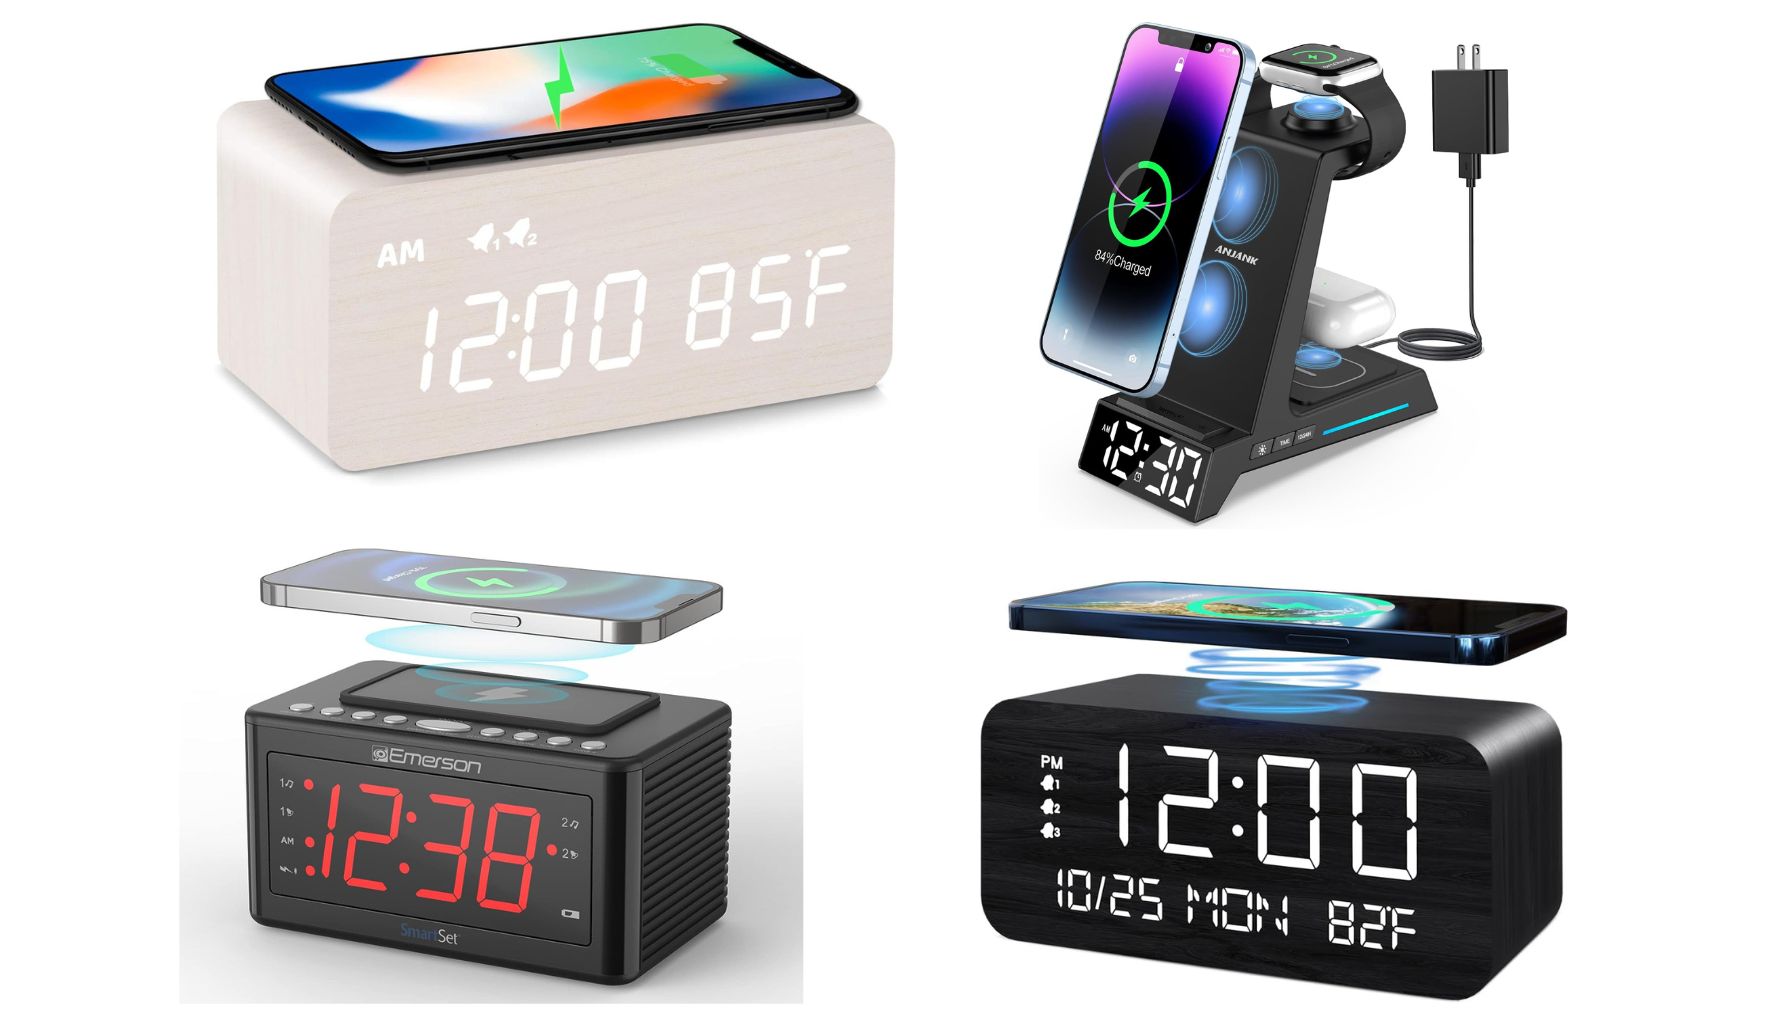 Best Alarm Clock with Wireless Charging